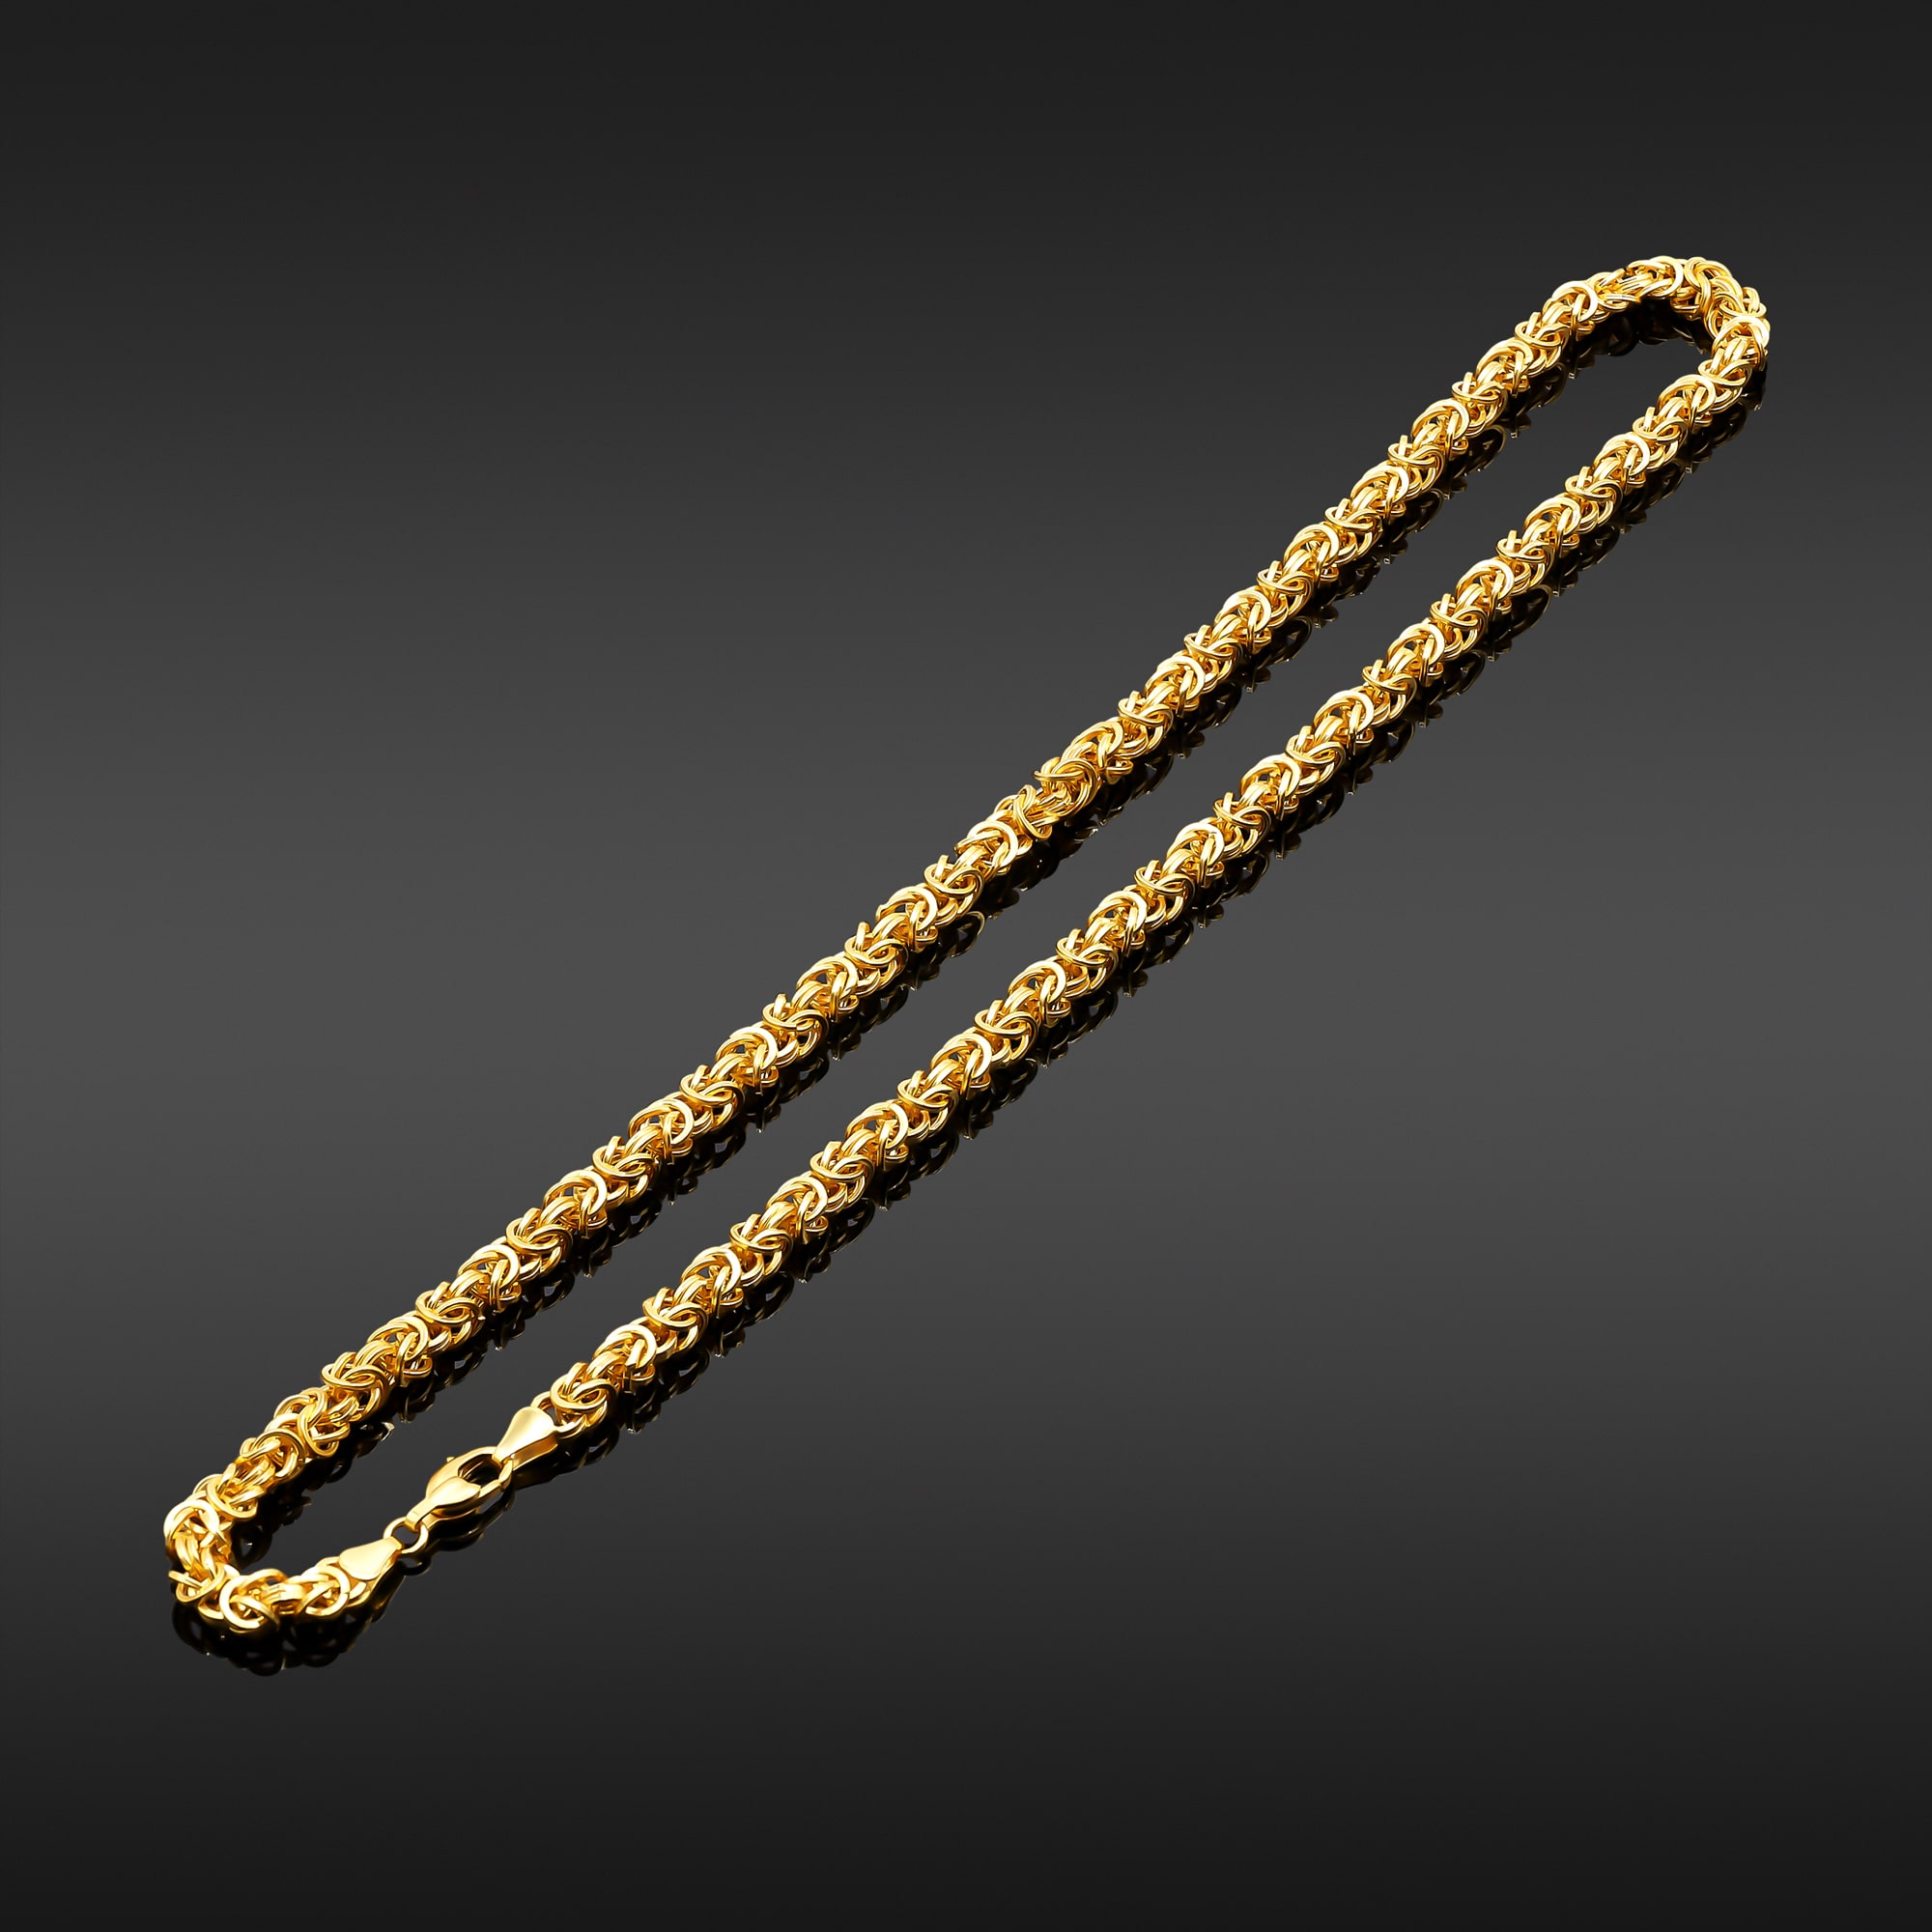 Solid Byzantine Chain Necklace 14K Yellow Gold 20